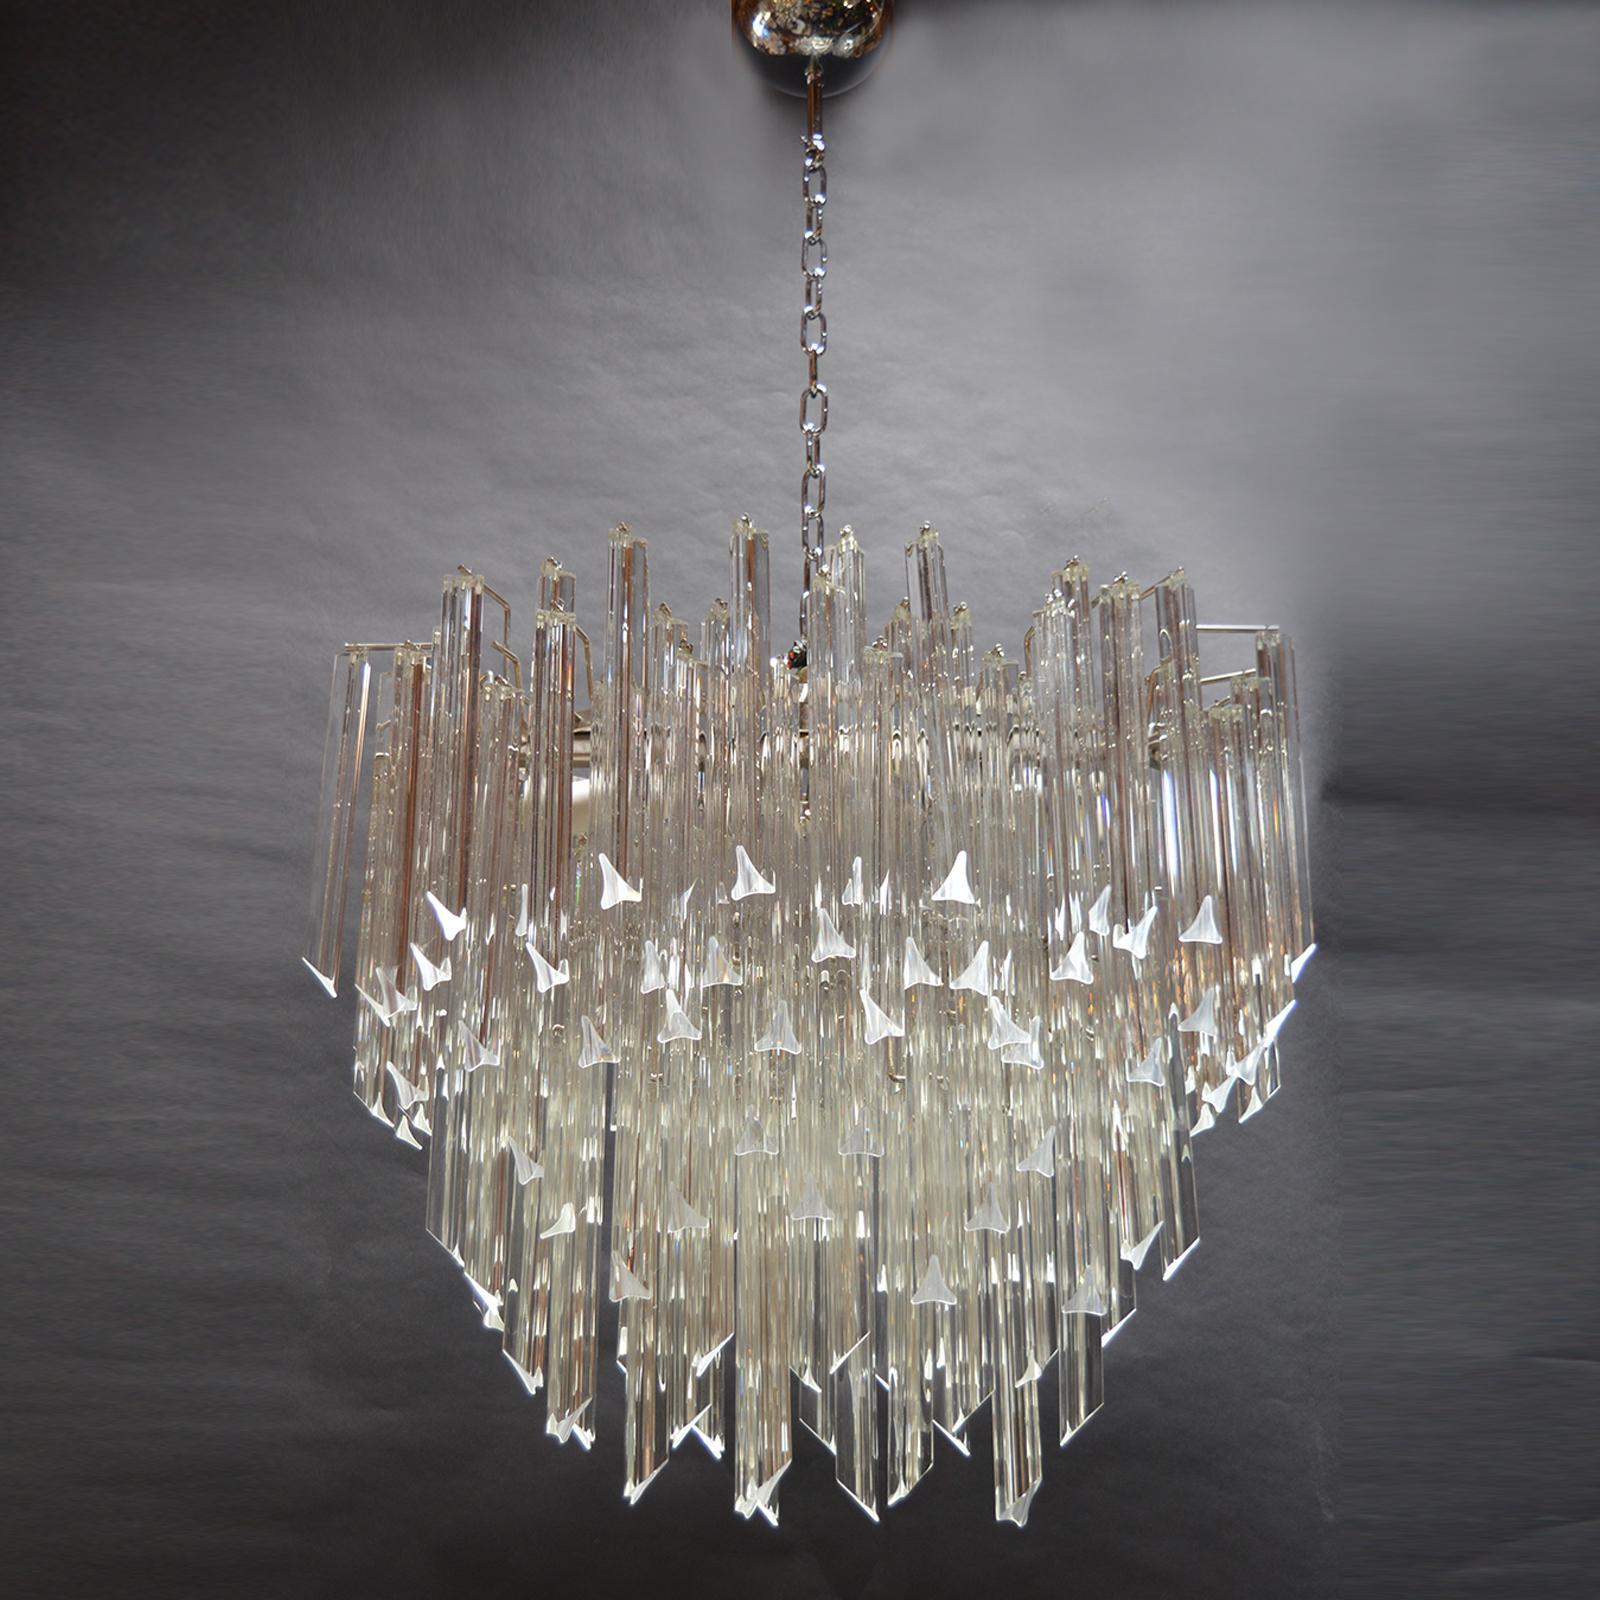 Clear Tiered Glass Chandelier. Italy, 1970s 

Stamped with sticker.
Height up to canopy is 52 inches as specified on the measurements, however, without the chain and canopy the chandelier has a height of 27 inches.